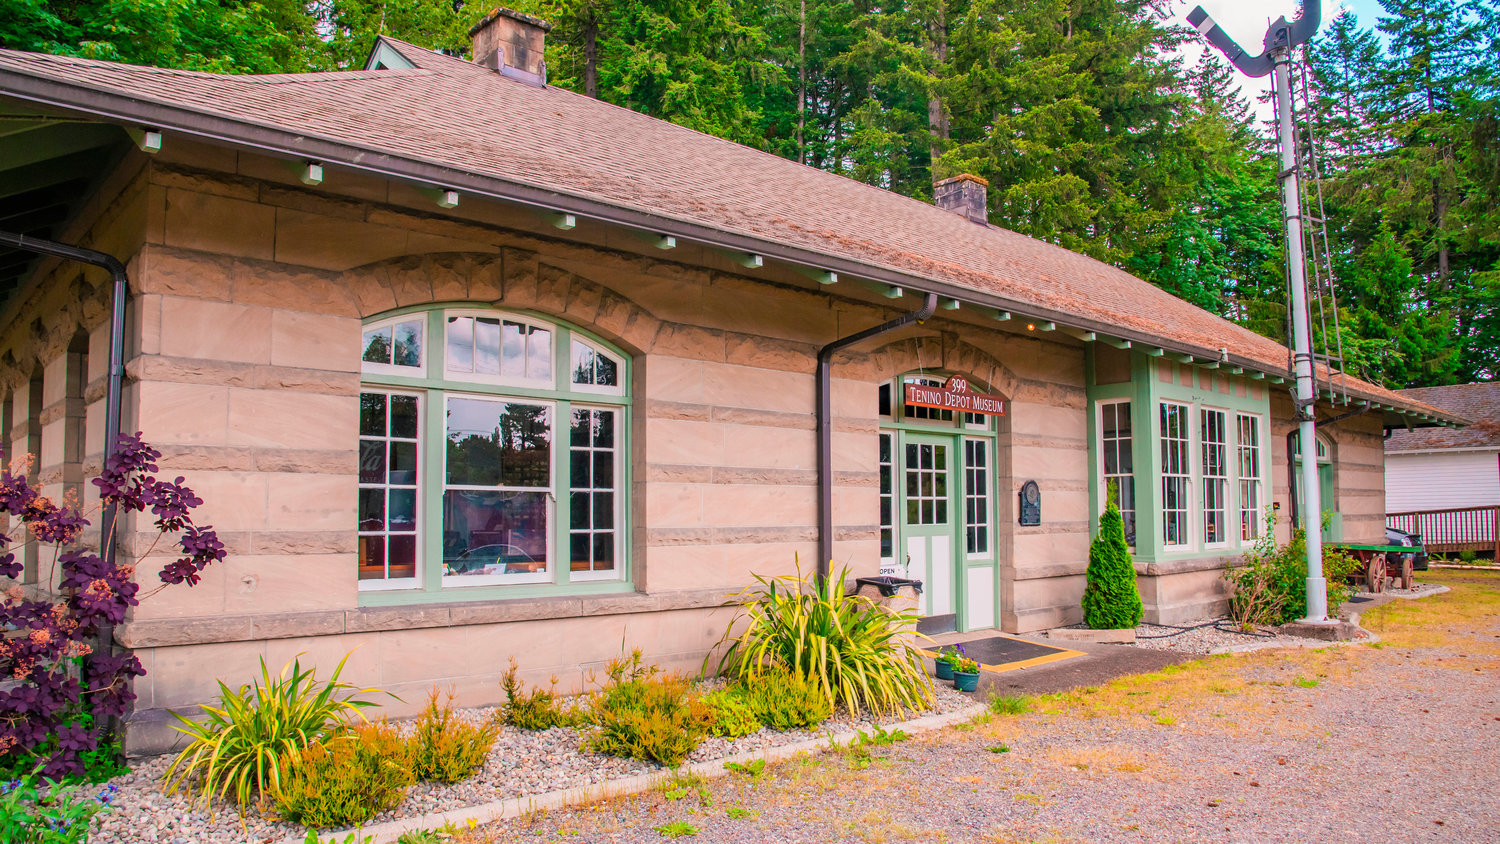 The Tenino Depot Museum is located off West Park Avenue near the Quarry Pool.